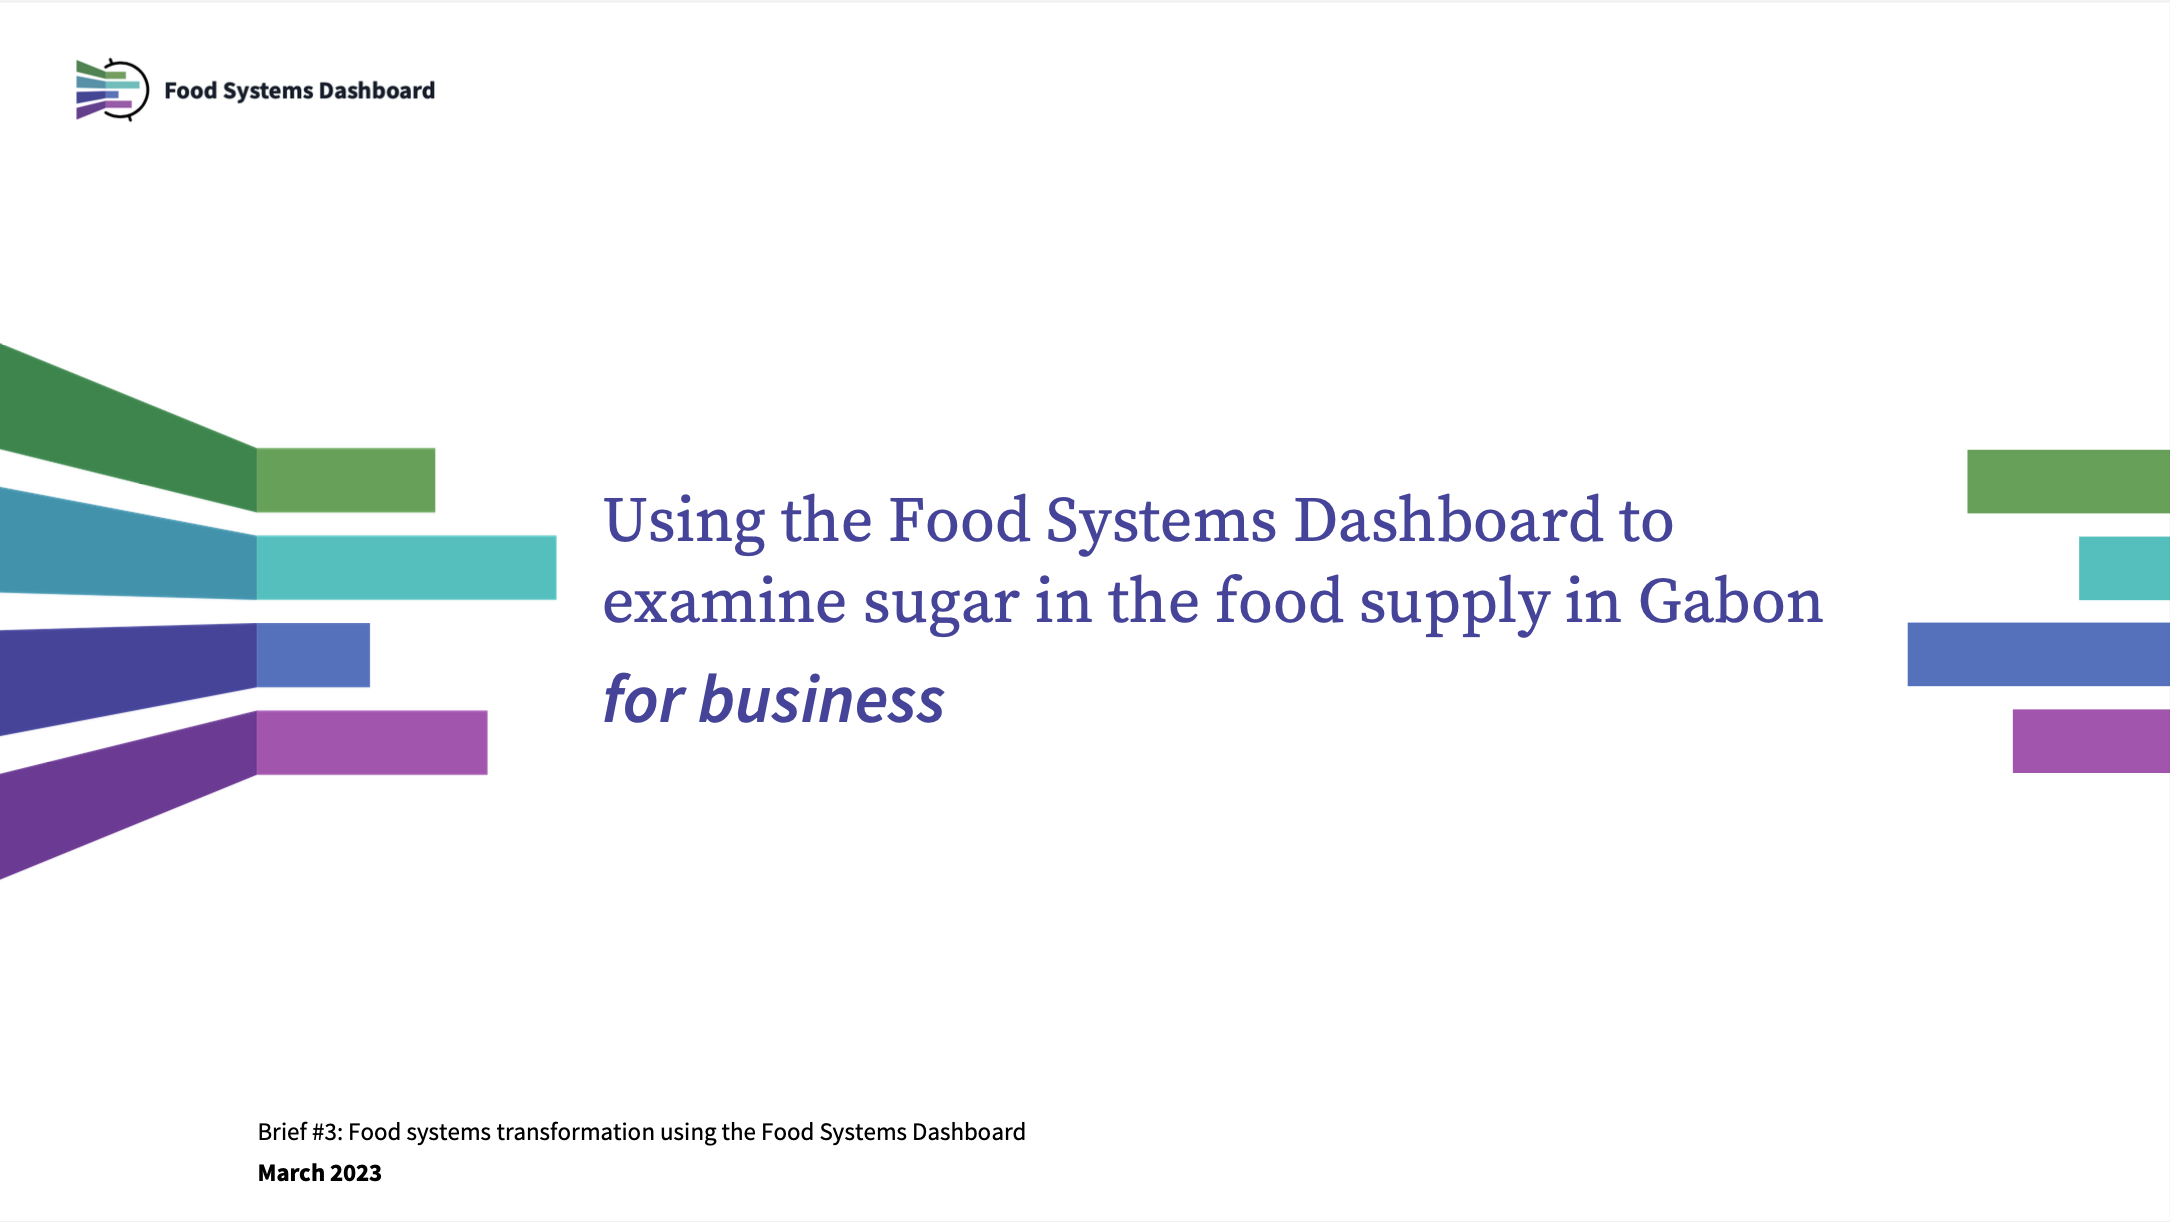 Using the Food Systems Dashboard to examine sugar in the food supply in Gabon